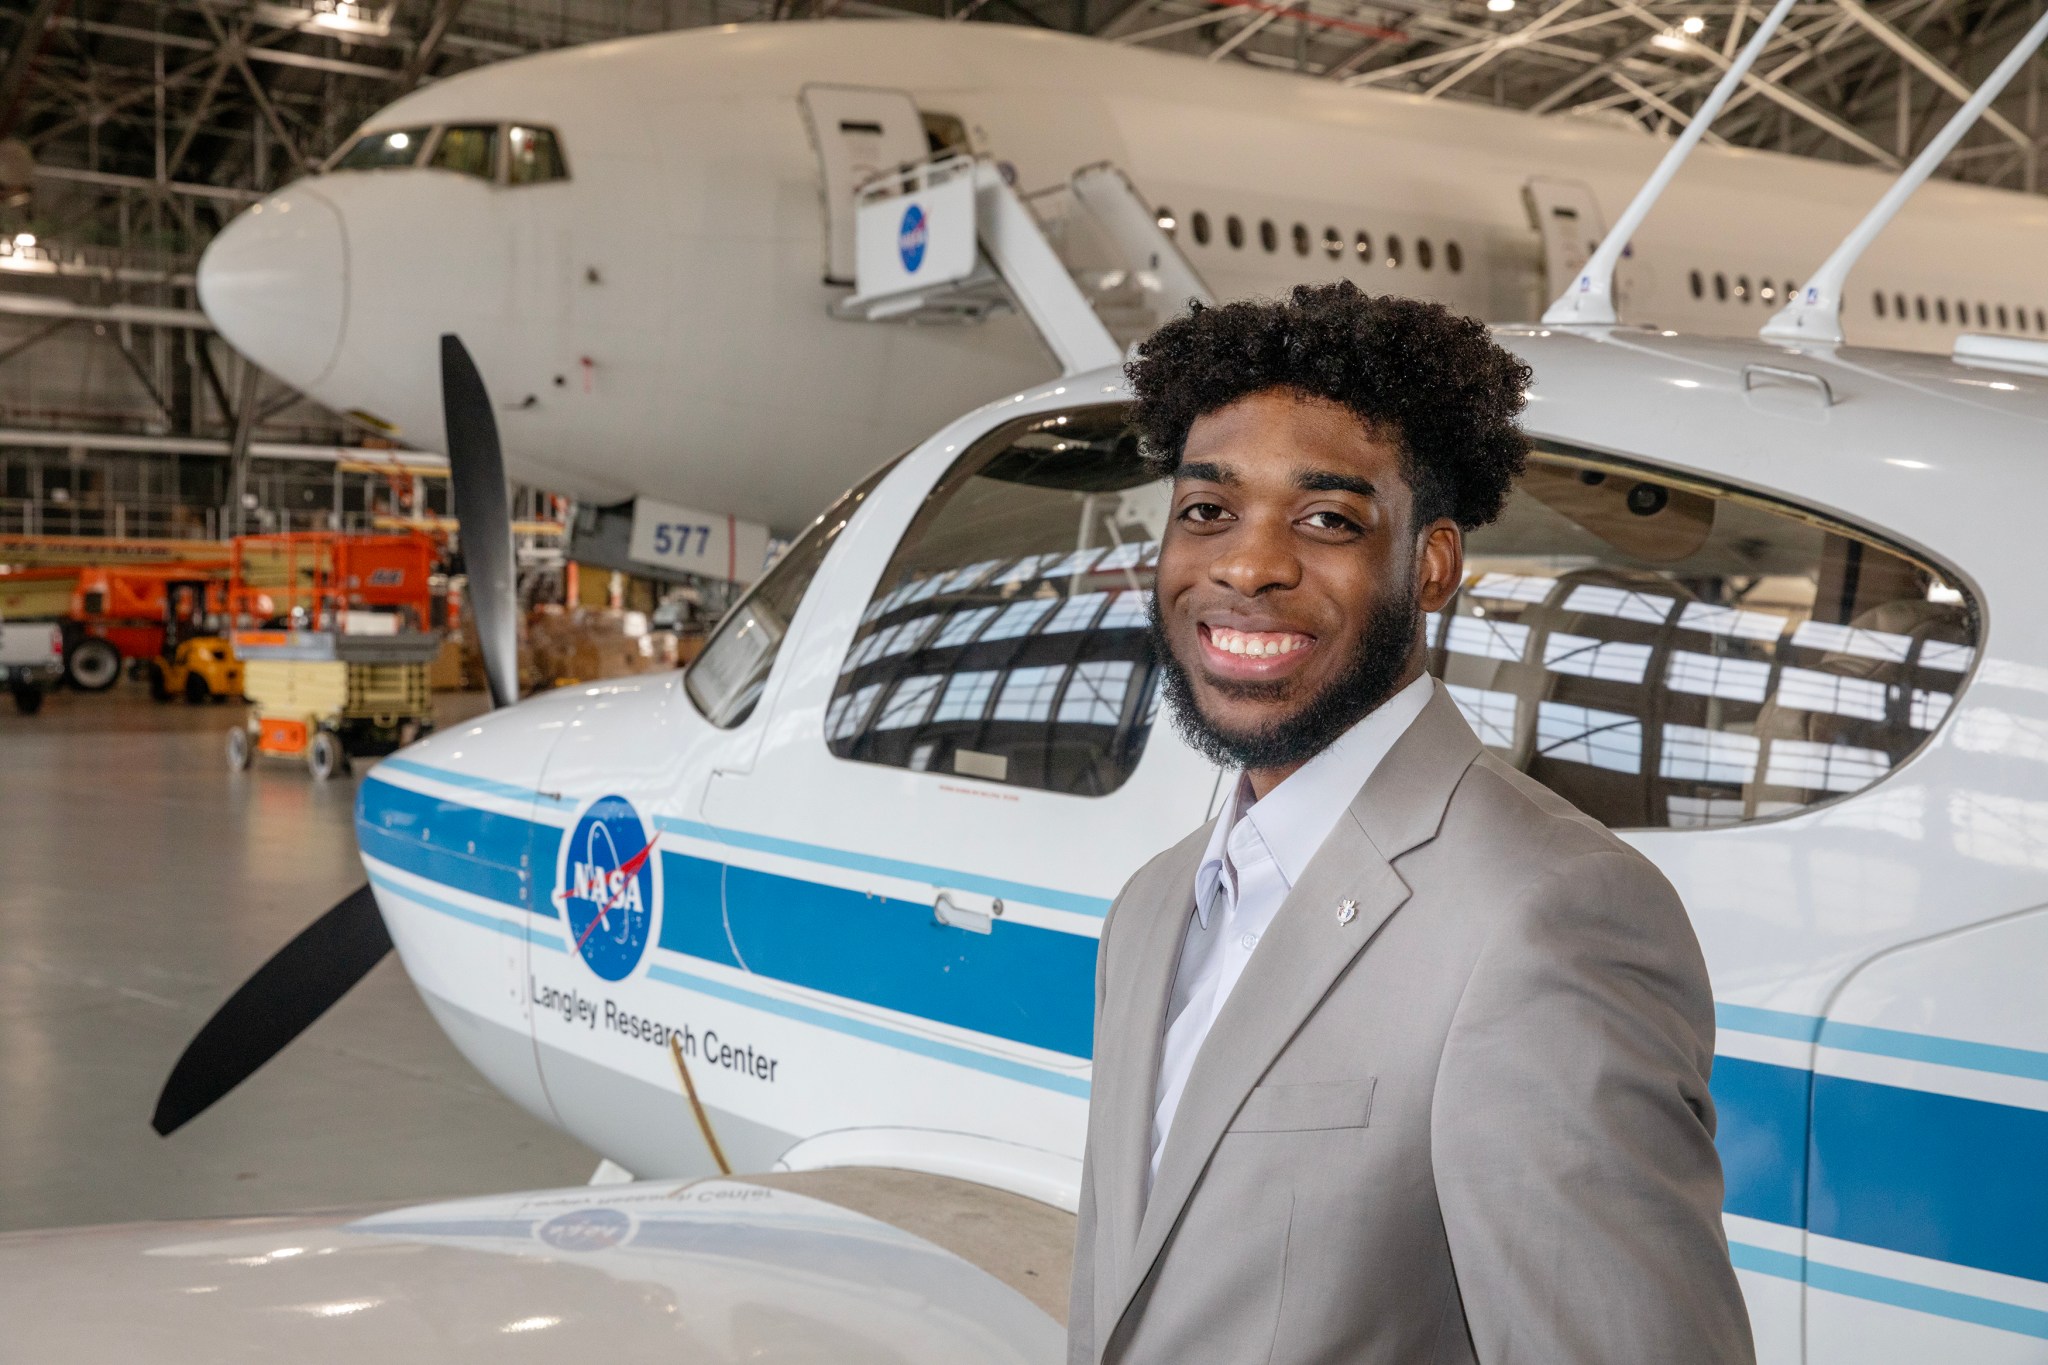 This is a photo of Brandon Sells, an aerospace engineer with the Aeronautics Systems Analysis Branch (ASAB) of the Systems Analysis and Concepts Directorate (SACD) at NASA Langley Research Center. Brandon is standing in front of a small white and blue plane with a propellor. A larger white plane can be seen in the background of the photo.